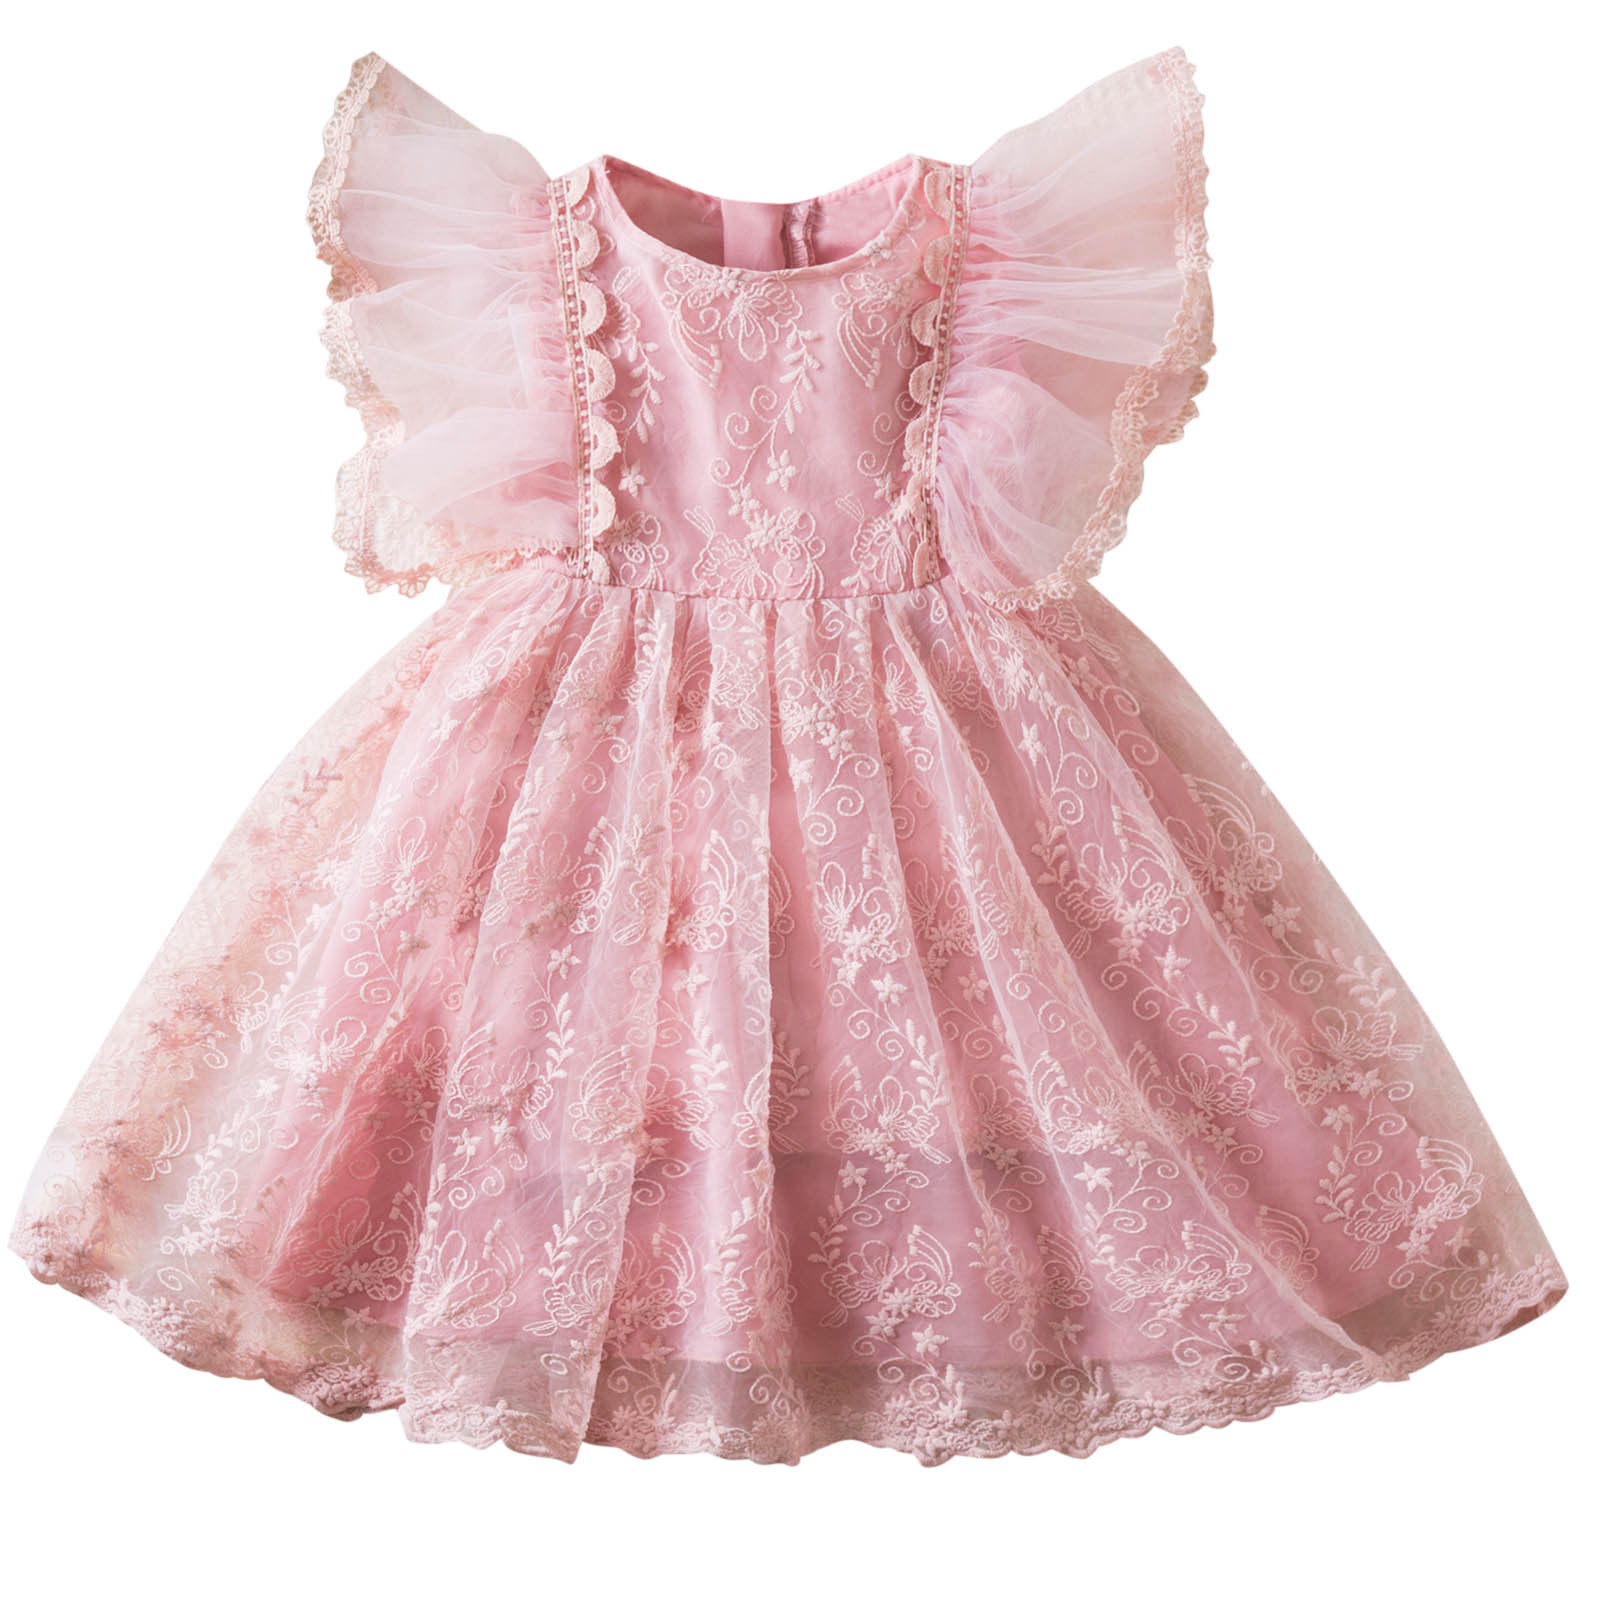 Embroidered Floral Mesh Tutu Dress for Toddlers Ruffle Trim Pleated ...